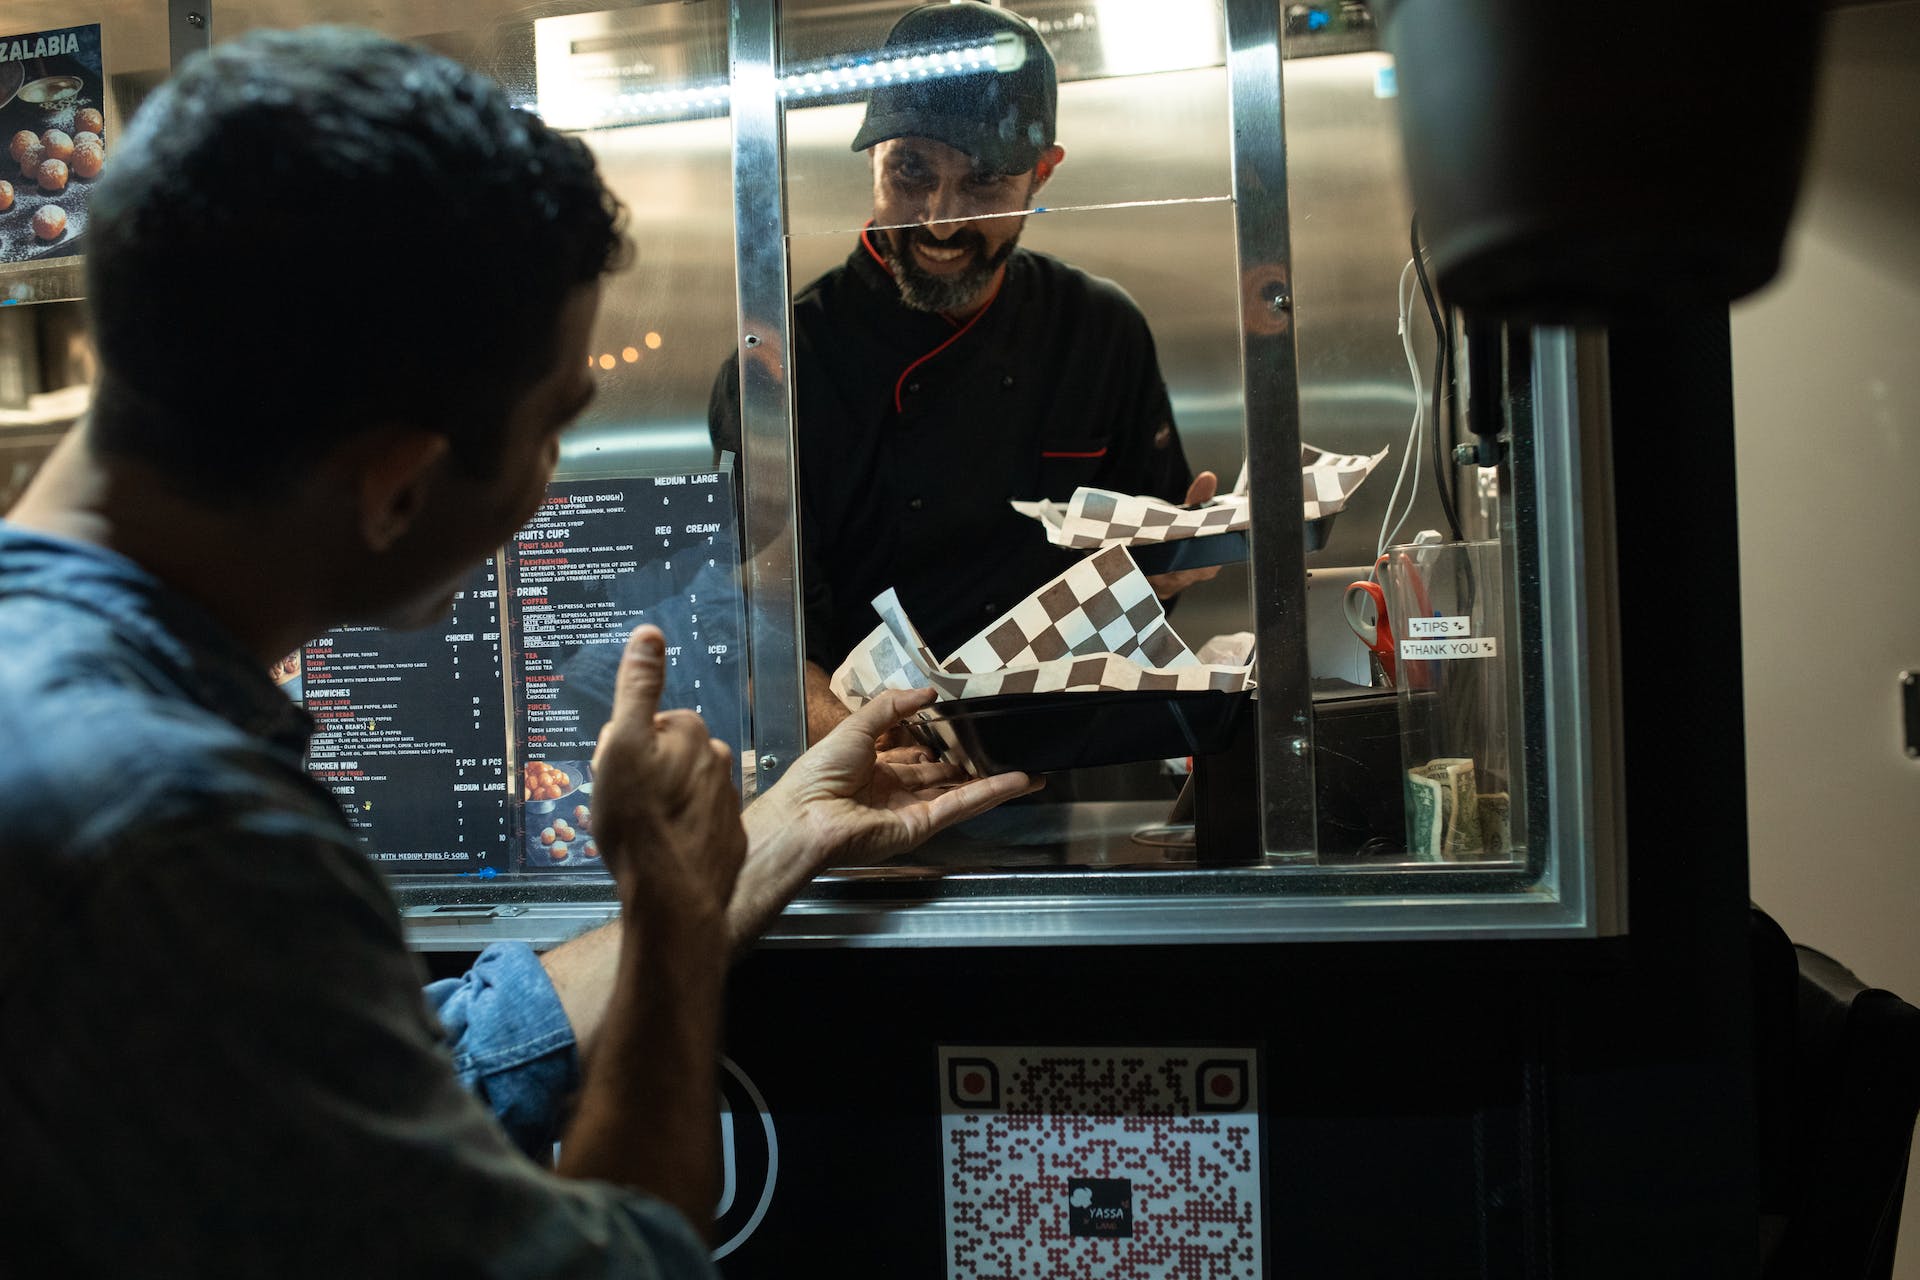 A man giving a food truck chef a thumbs up